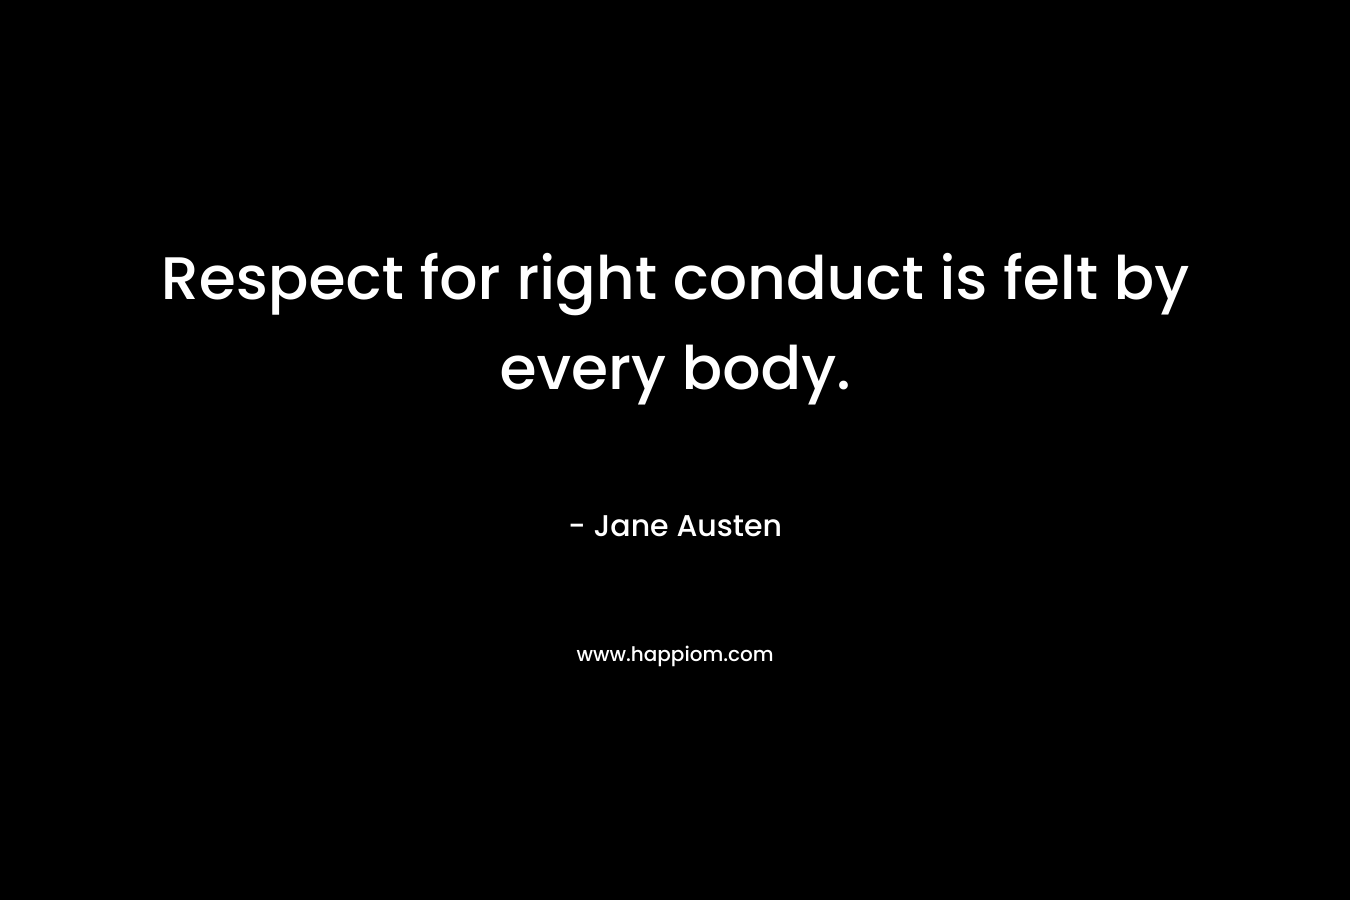 Respect for right conduct is felt by every body. – Jane Austen